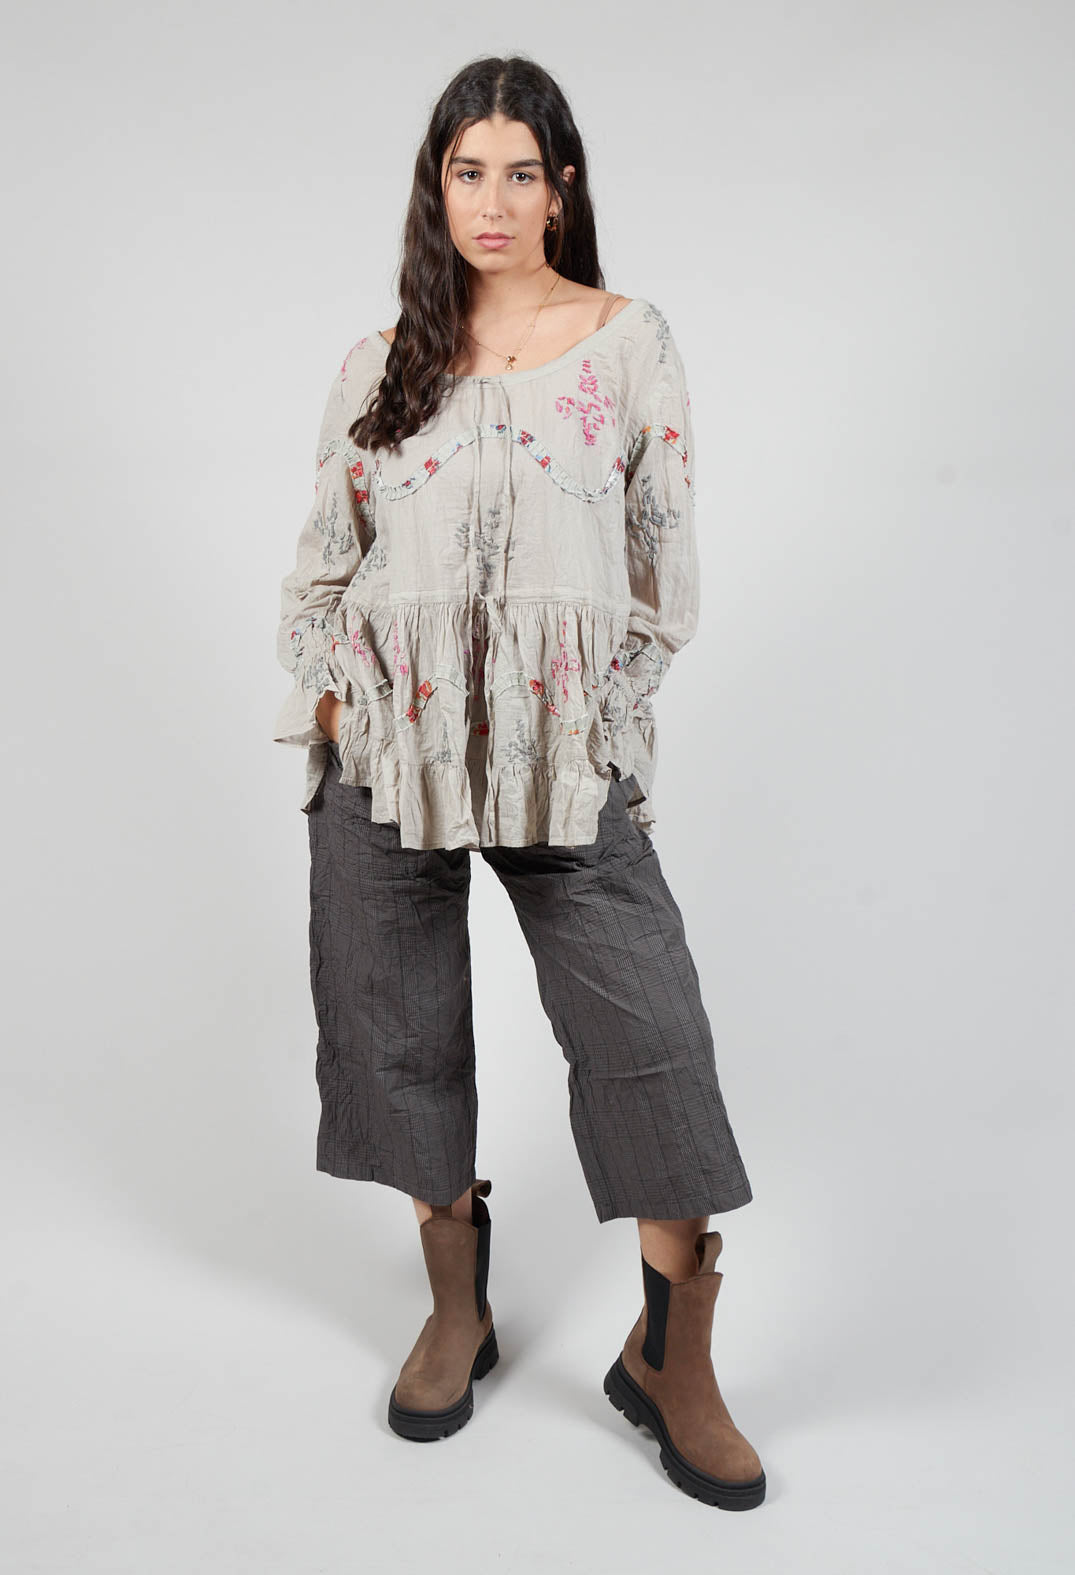 Cindy Blouse in Original Embroidered Voile